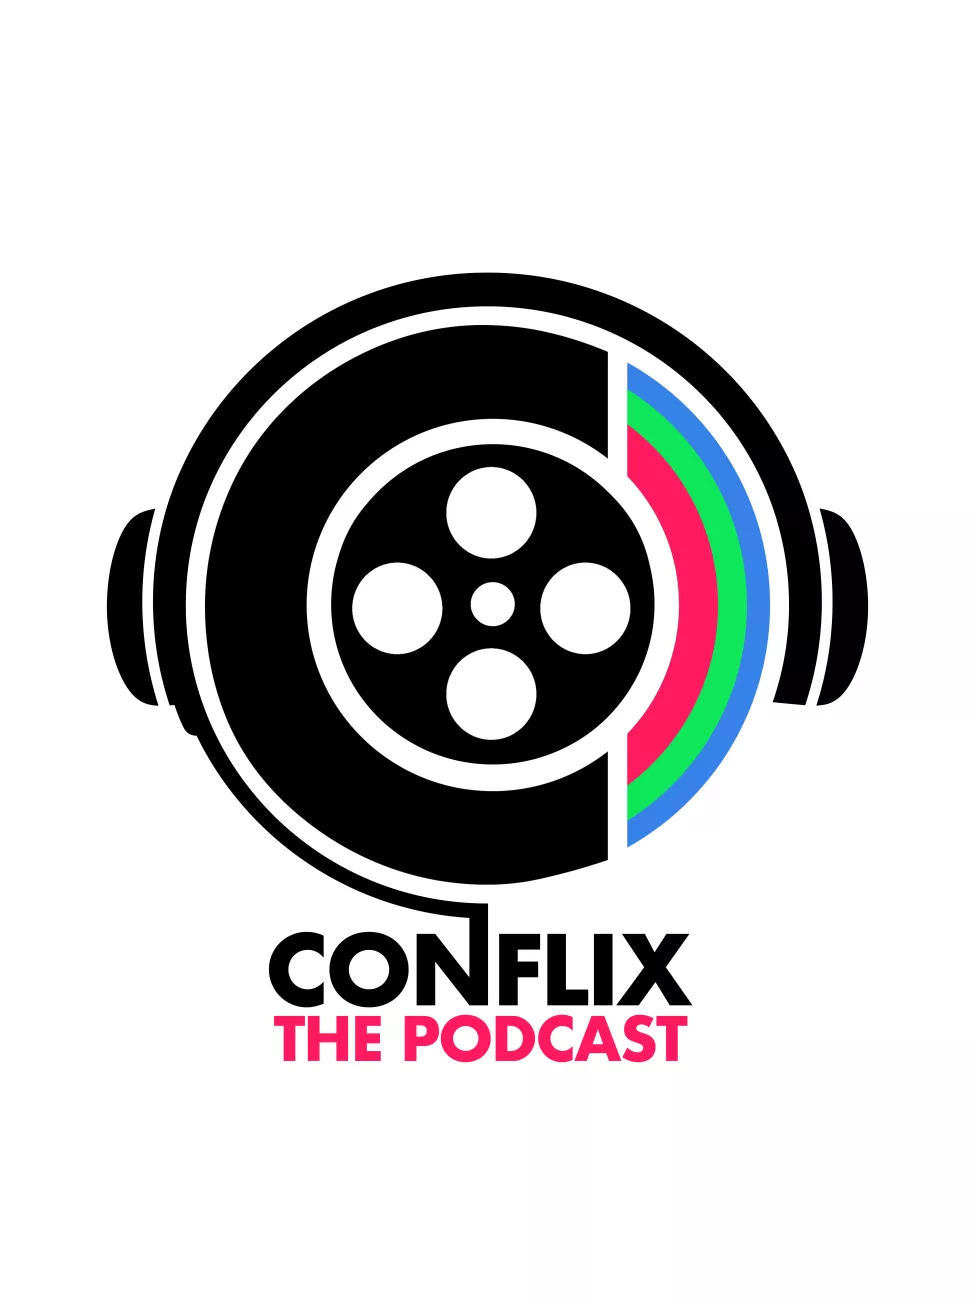 Conflix the Podcast